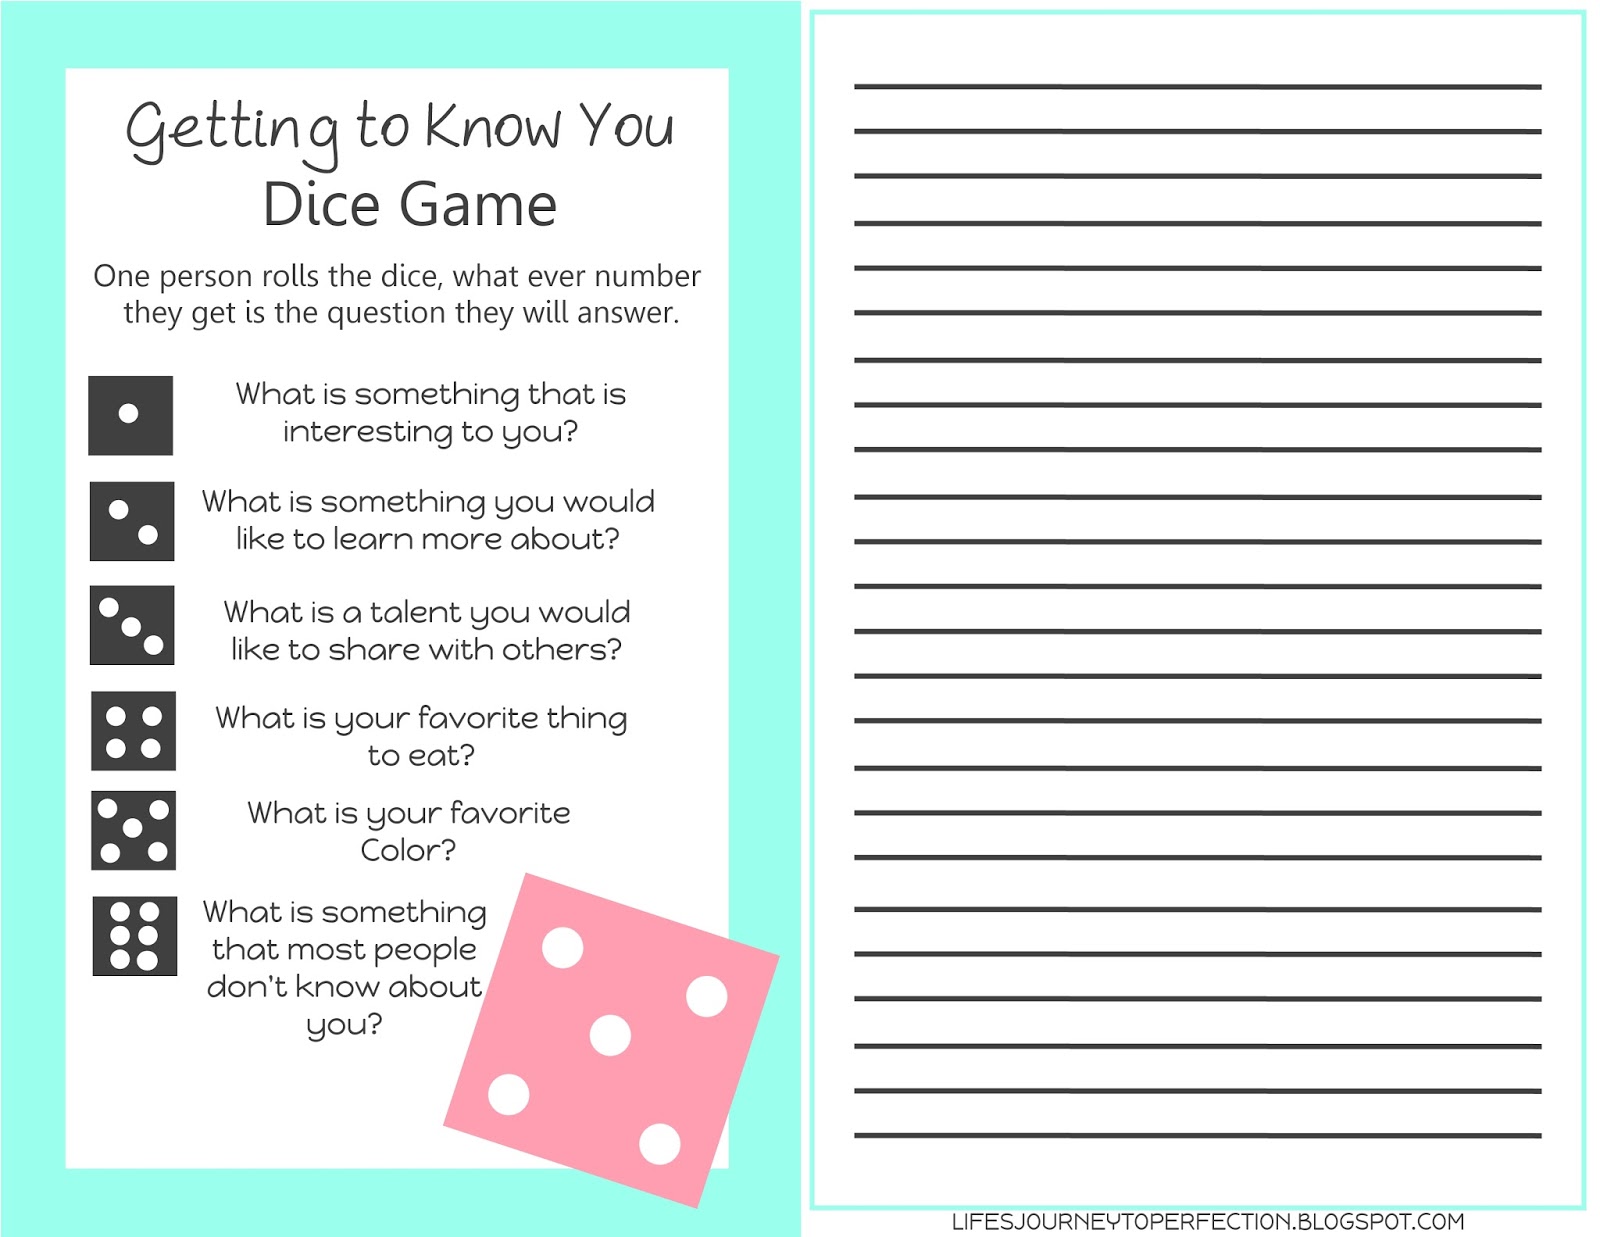 Life's Journey To Perfection: Getting to Know You Dice Game Printable